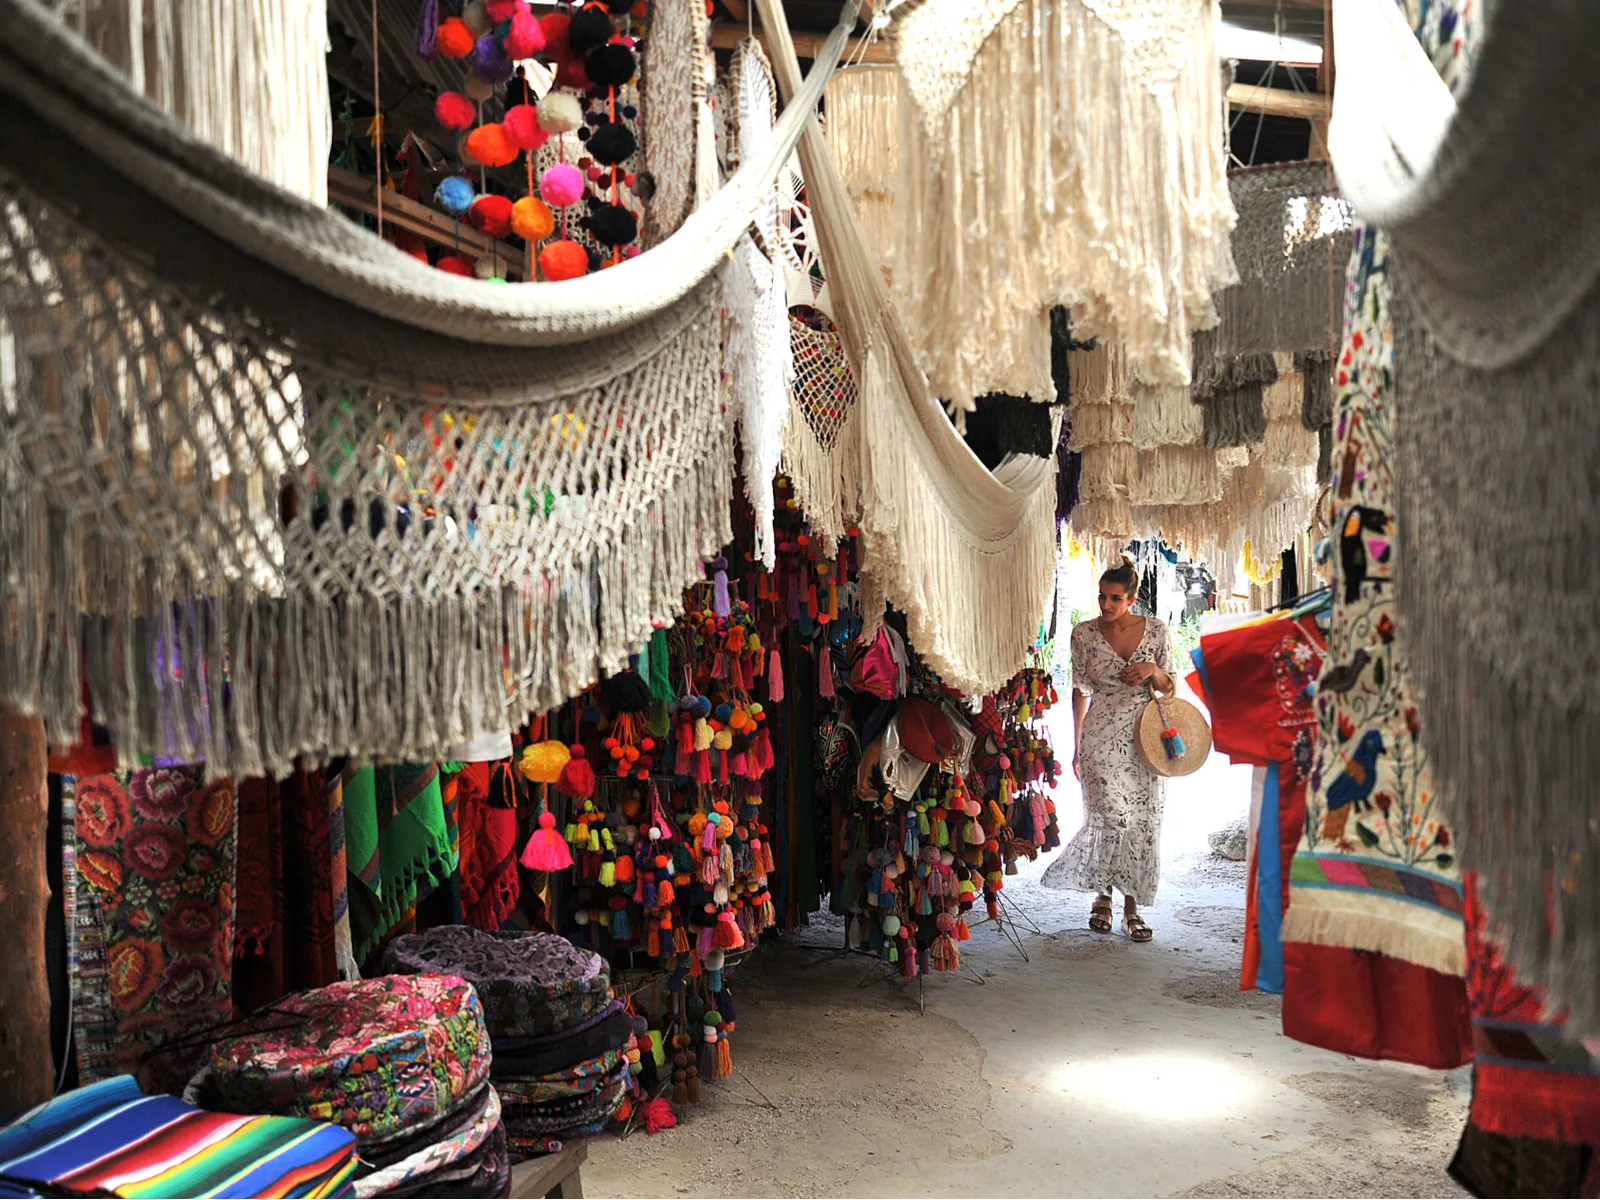 A photo of a woman walking through the market by one of the best areas in Tulum to stay